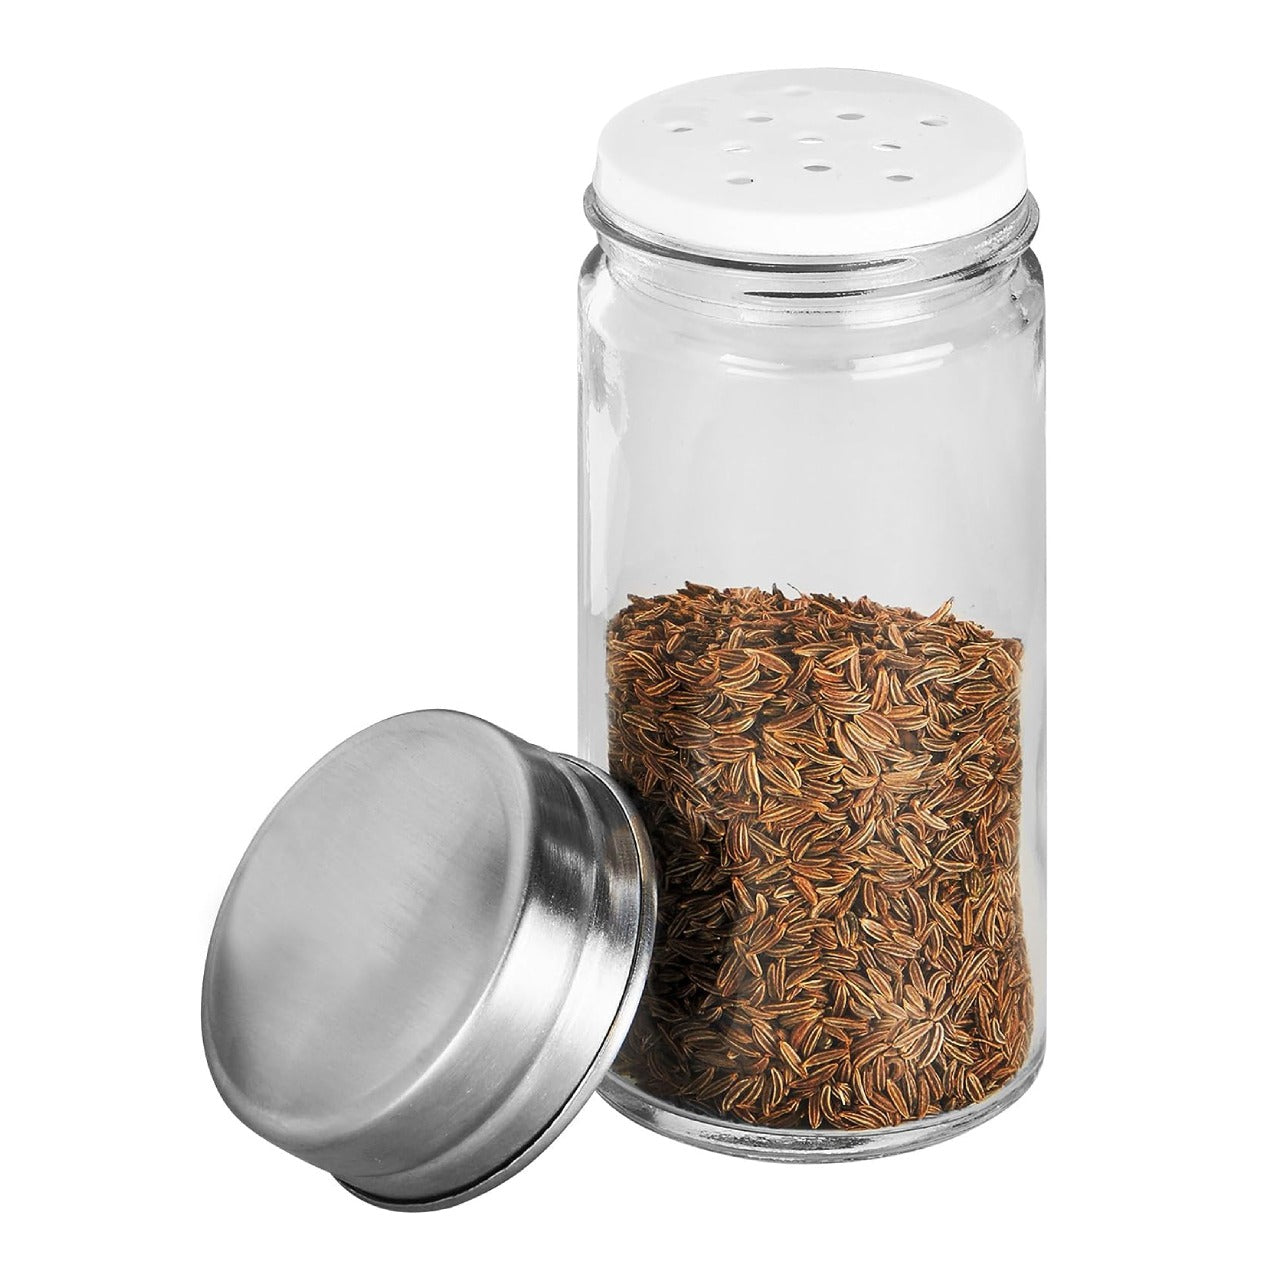 8/12 Spice Jars Carousel Stainless Steel Rotating Spice Rack with something in it